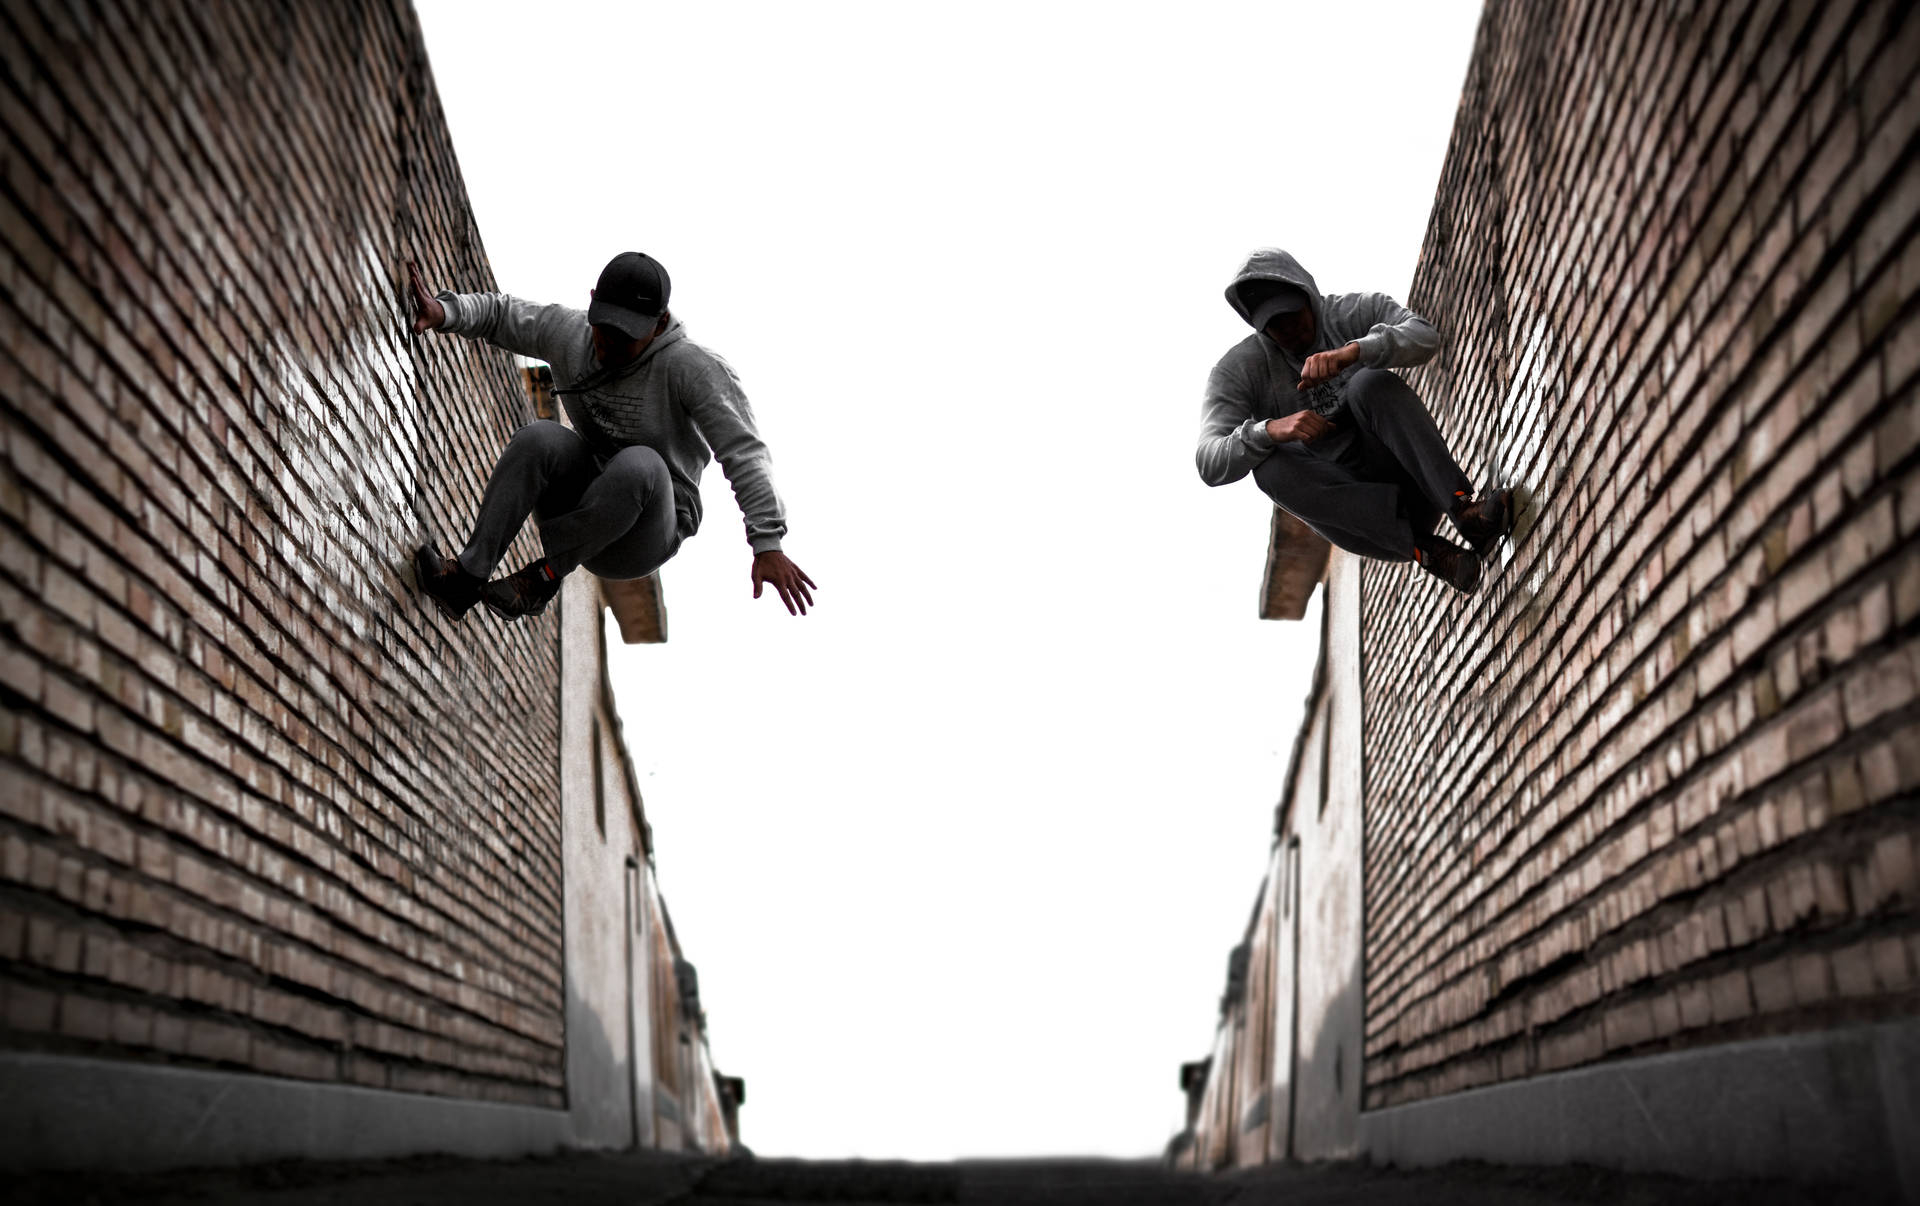 1920x1206 45 Parkour Wallpapers \u0026 Backgrounds For FREE